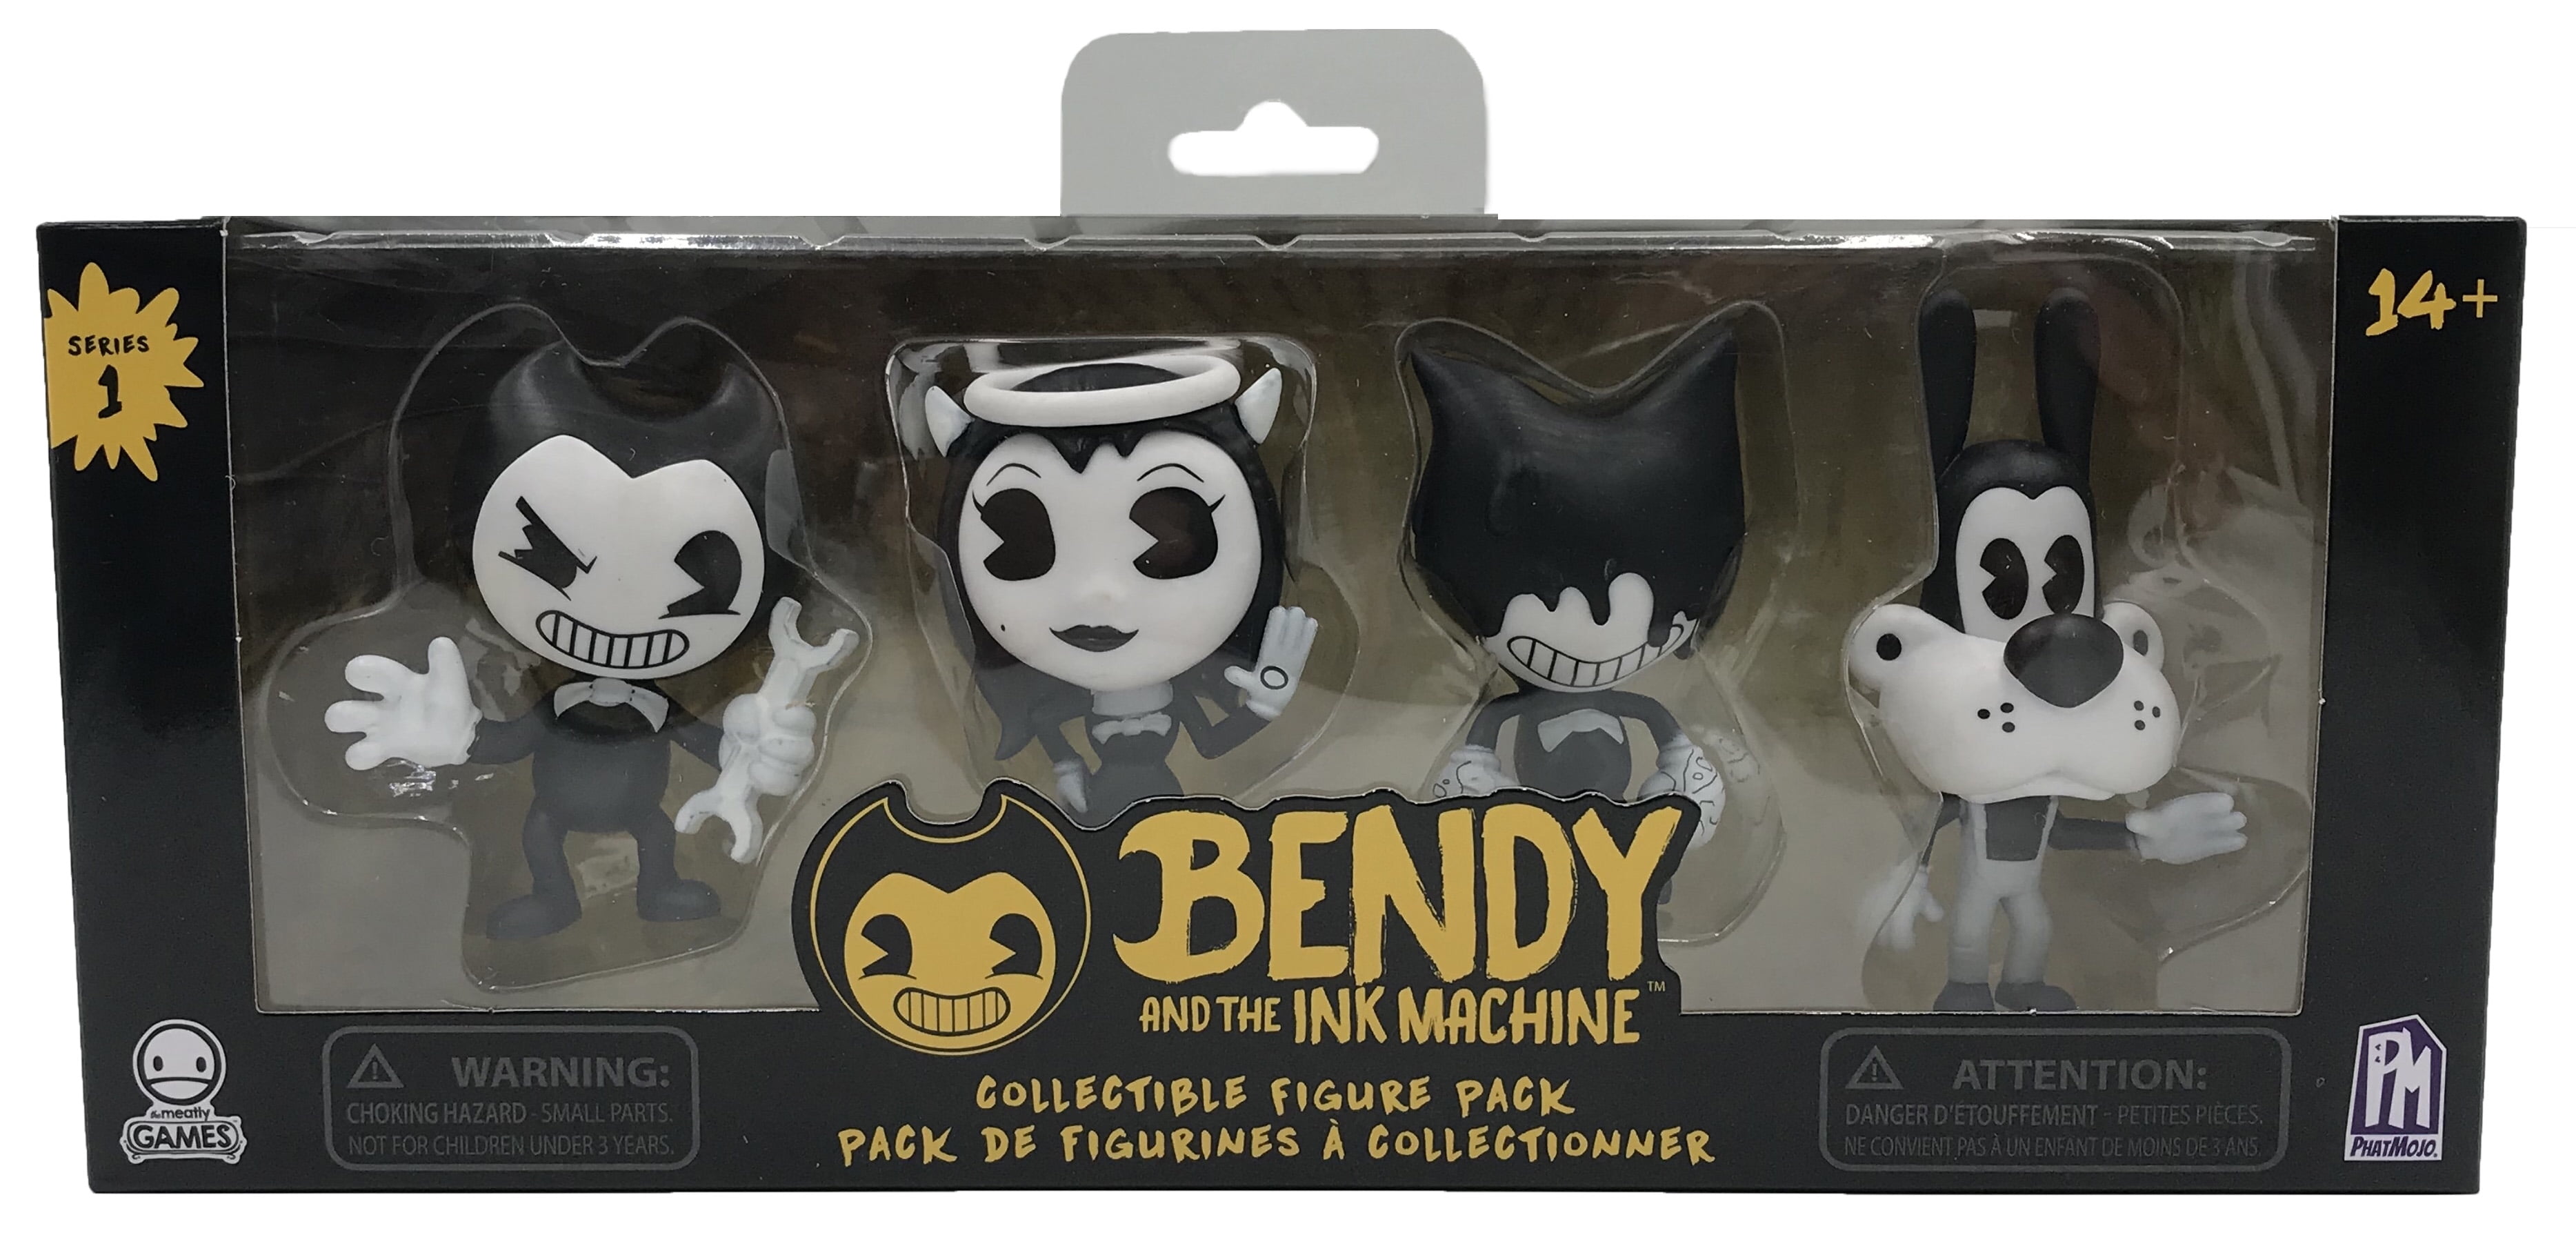 Bendy and the Ink Machine Bendy Construction Set New Gift Collectable Collection 